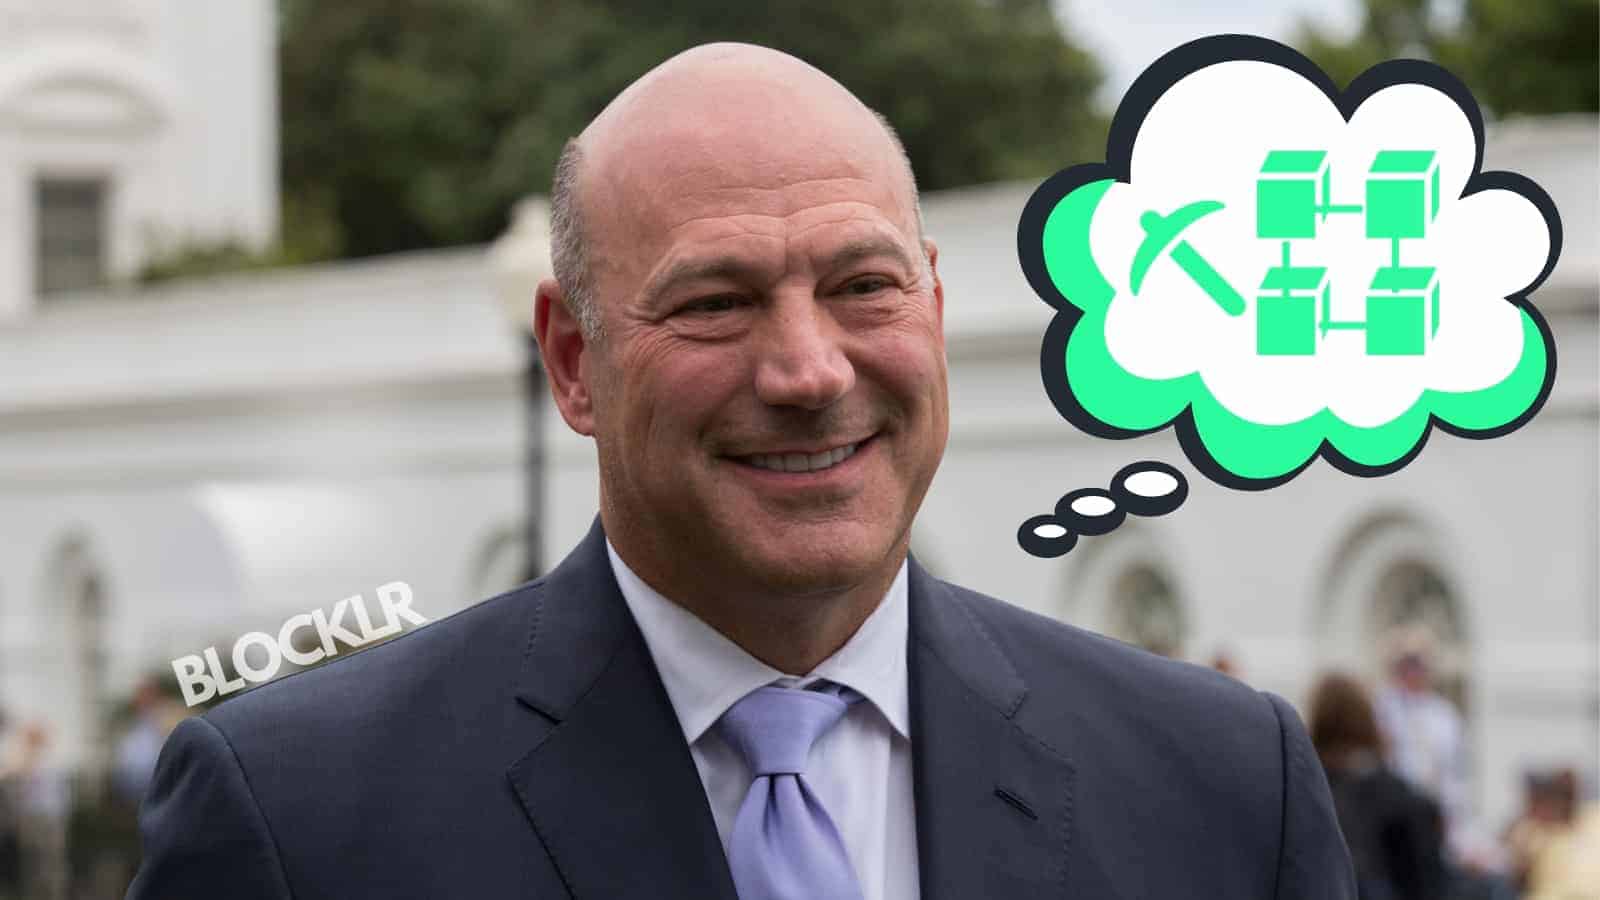 Spring Labs: The Blockchain Startup That Gary Cohn Joined